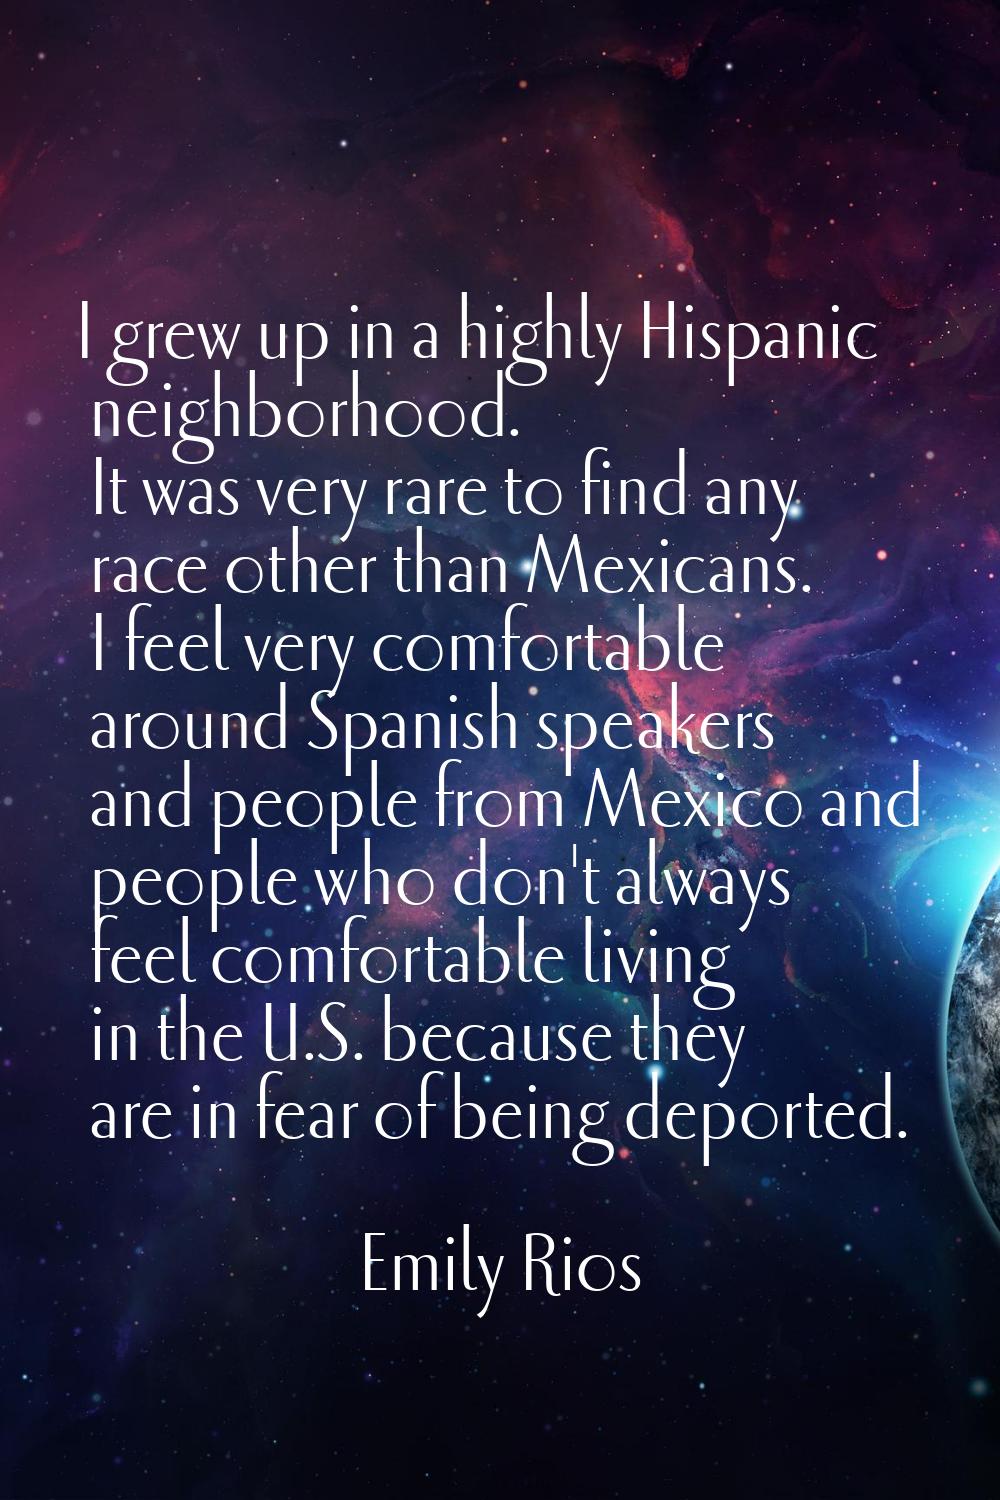 I grew up in a highly Hispanic neighborhood. It was very rare to find any race other than Mexicans.